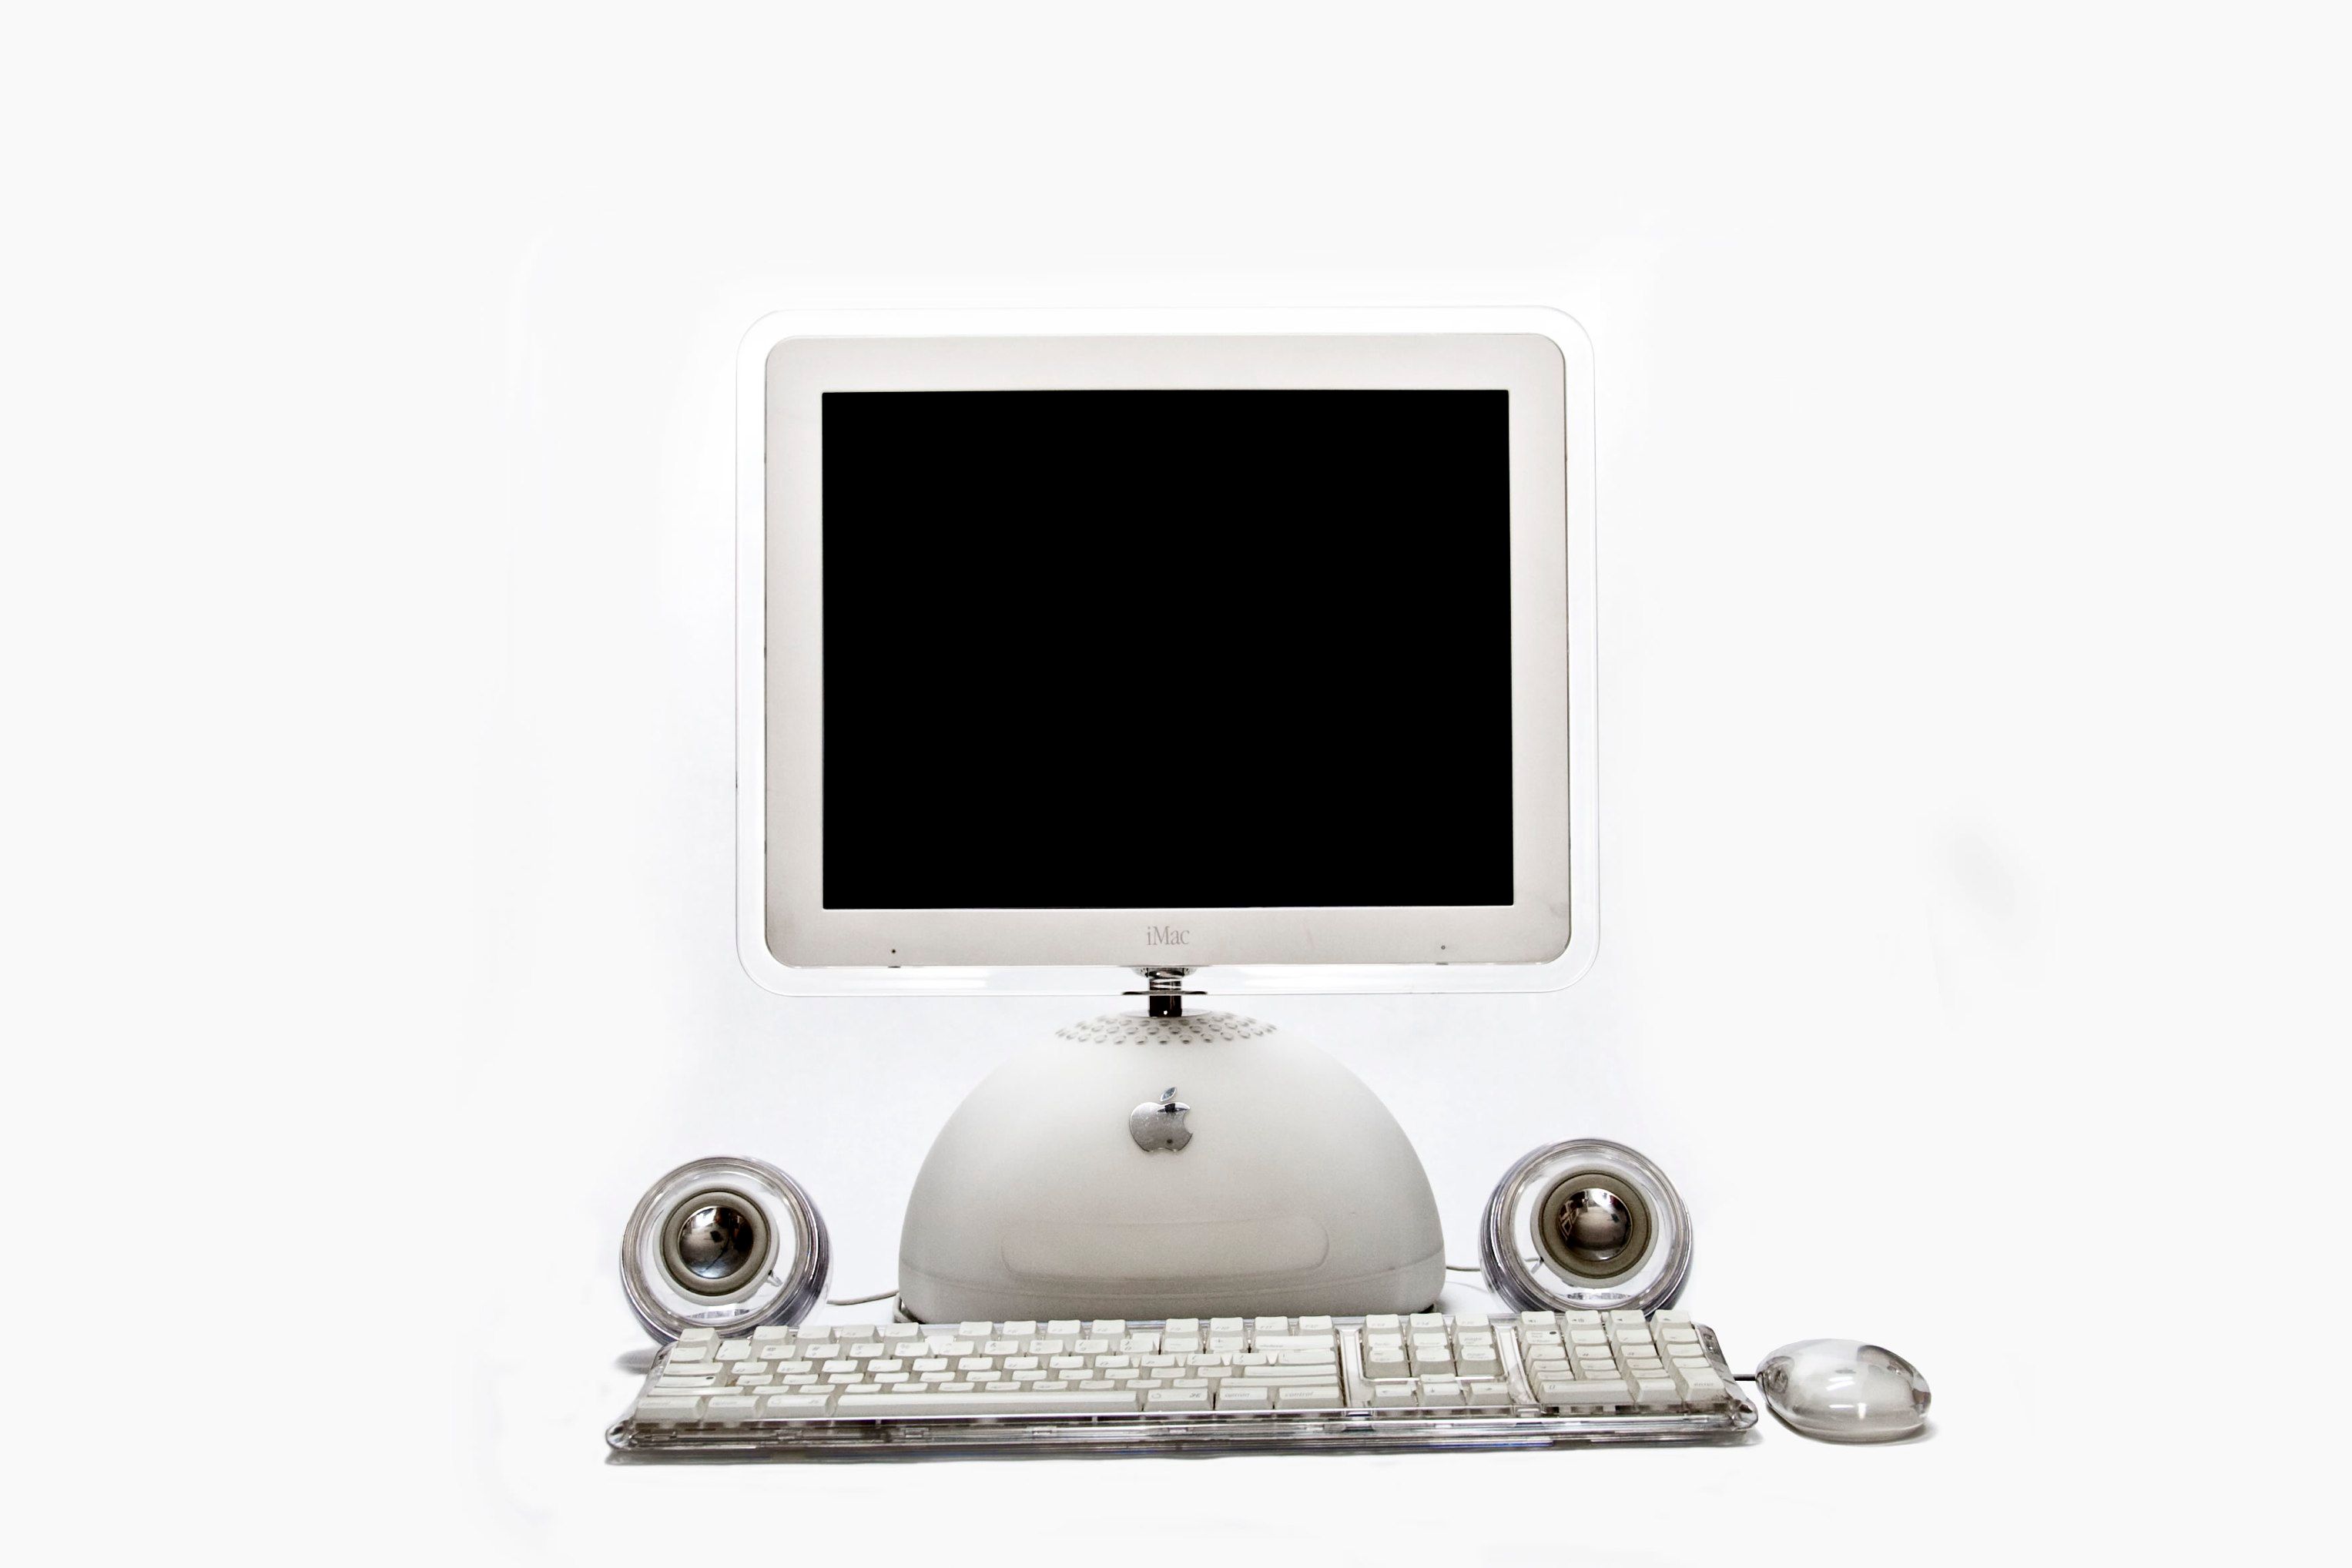 An iMac G4 sits against a white background with speakers, a keyboard, and a mouse surrounding it